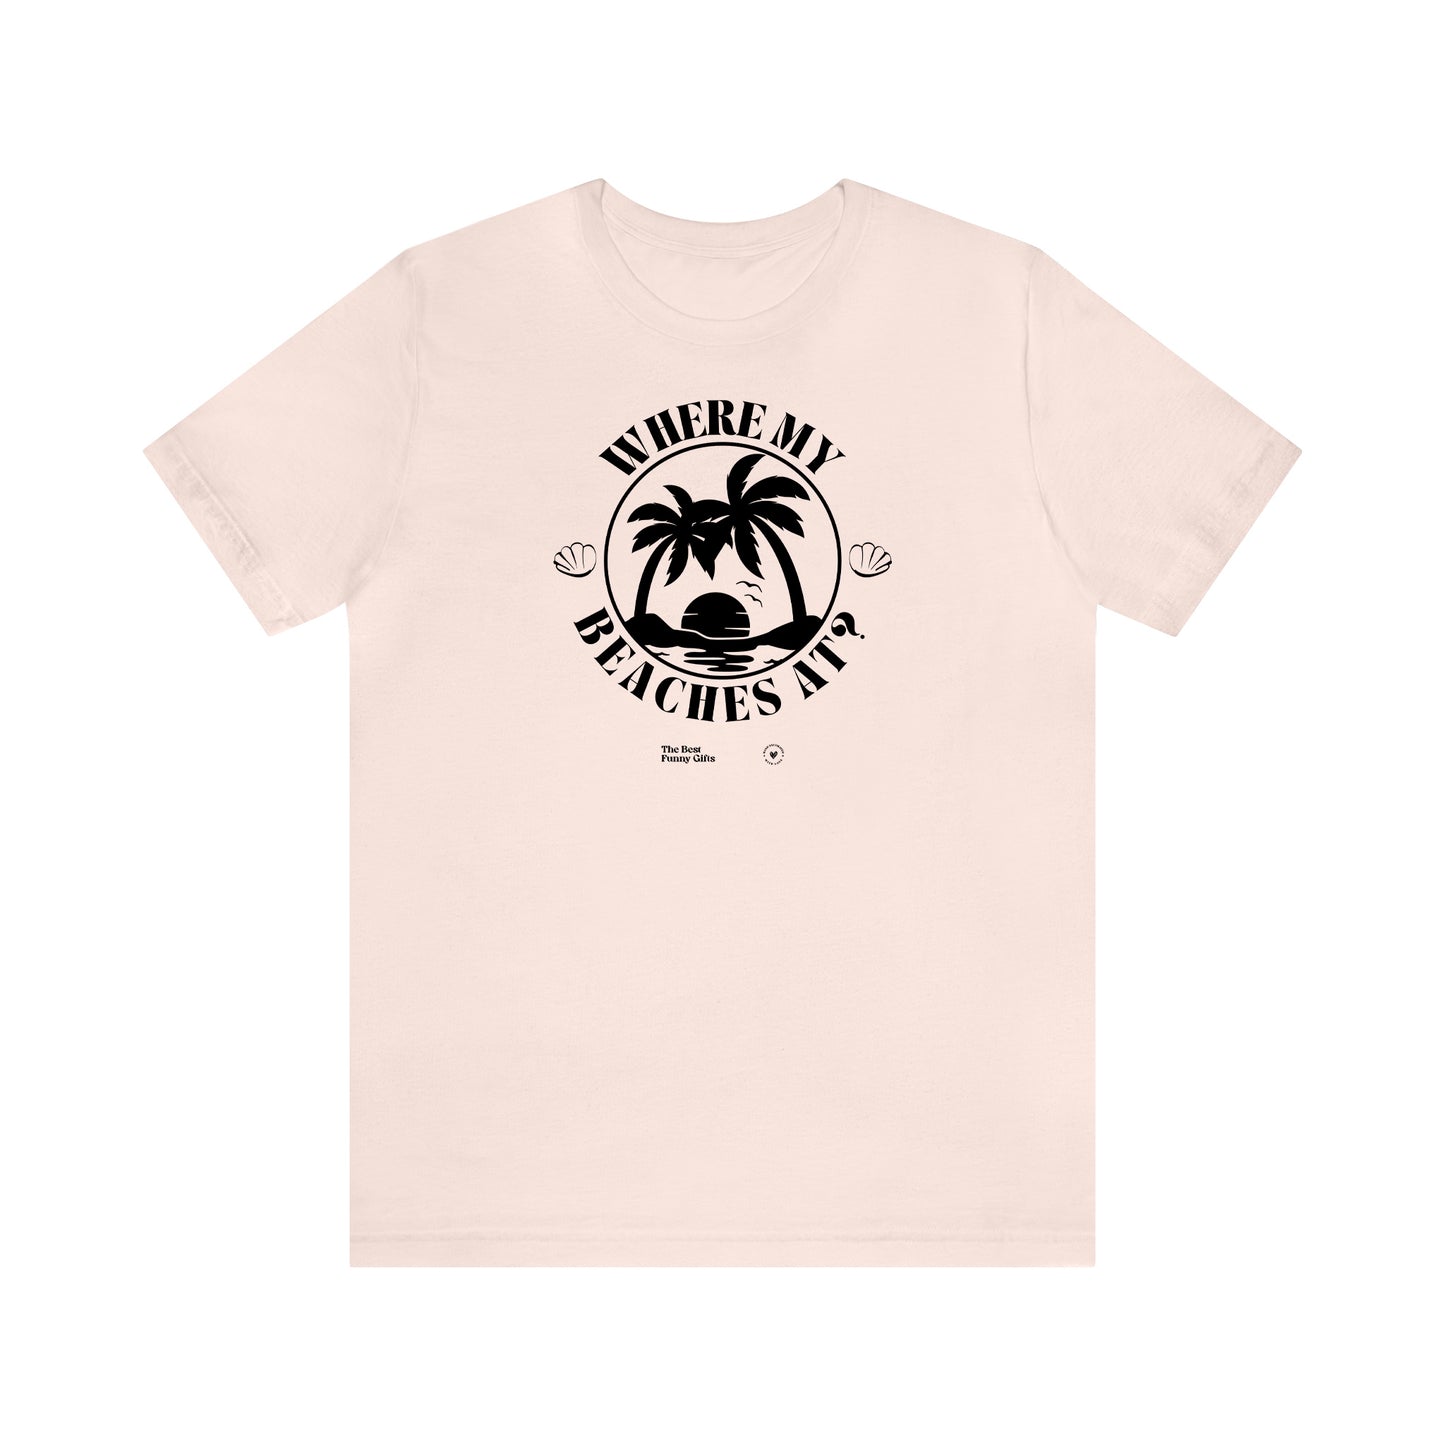 Funny Shirts for Women - Where My Beaches at? - Women’s T Shirts